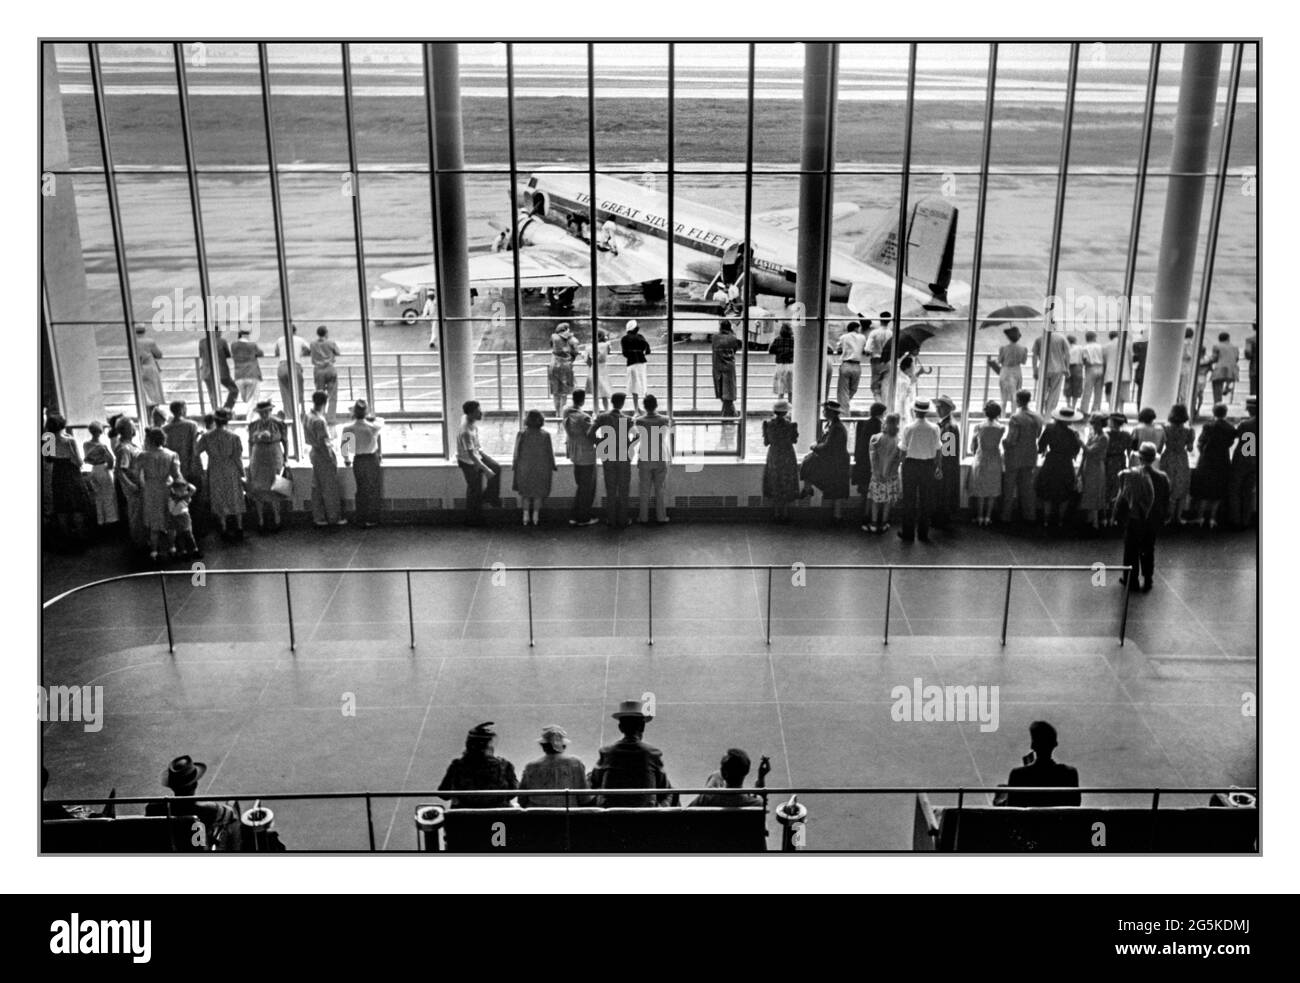 Vintage 1940s Airport Terminal Visitors watching DC3 airplane aircraft boarding activity. Seen from viewing platform at the municipal airport in Washington, D.C.] Jack Delano photographer  [1941 July]  United States--District of Columbia--Washington (D.C.) Golden age of flying.  DC3 Silver Fleet Eastern Airlines propeller aircraft outside terminal boarding passengers. Stock Photo